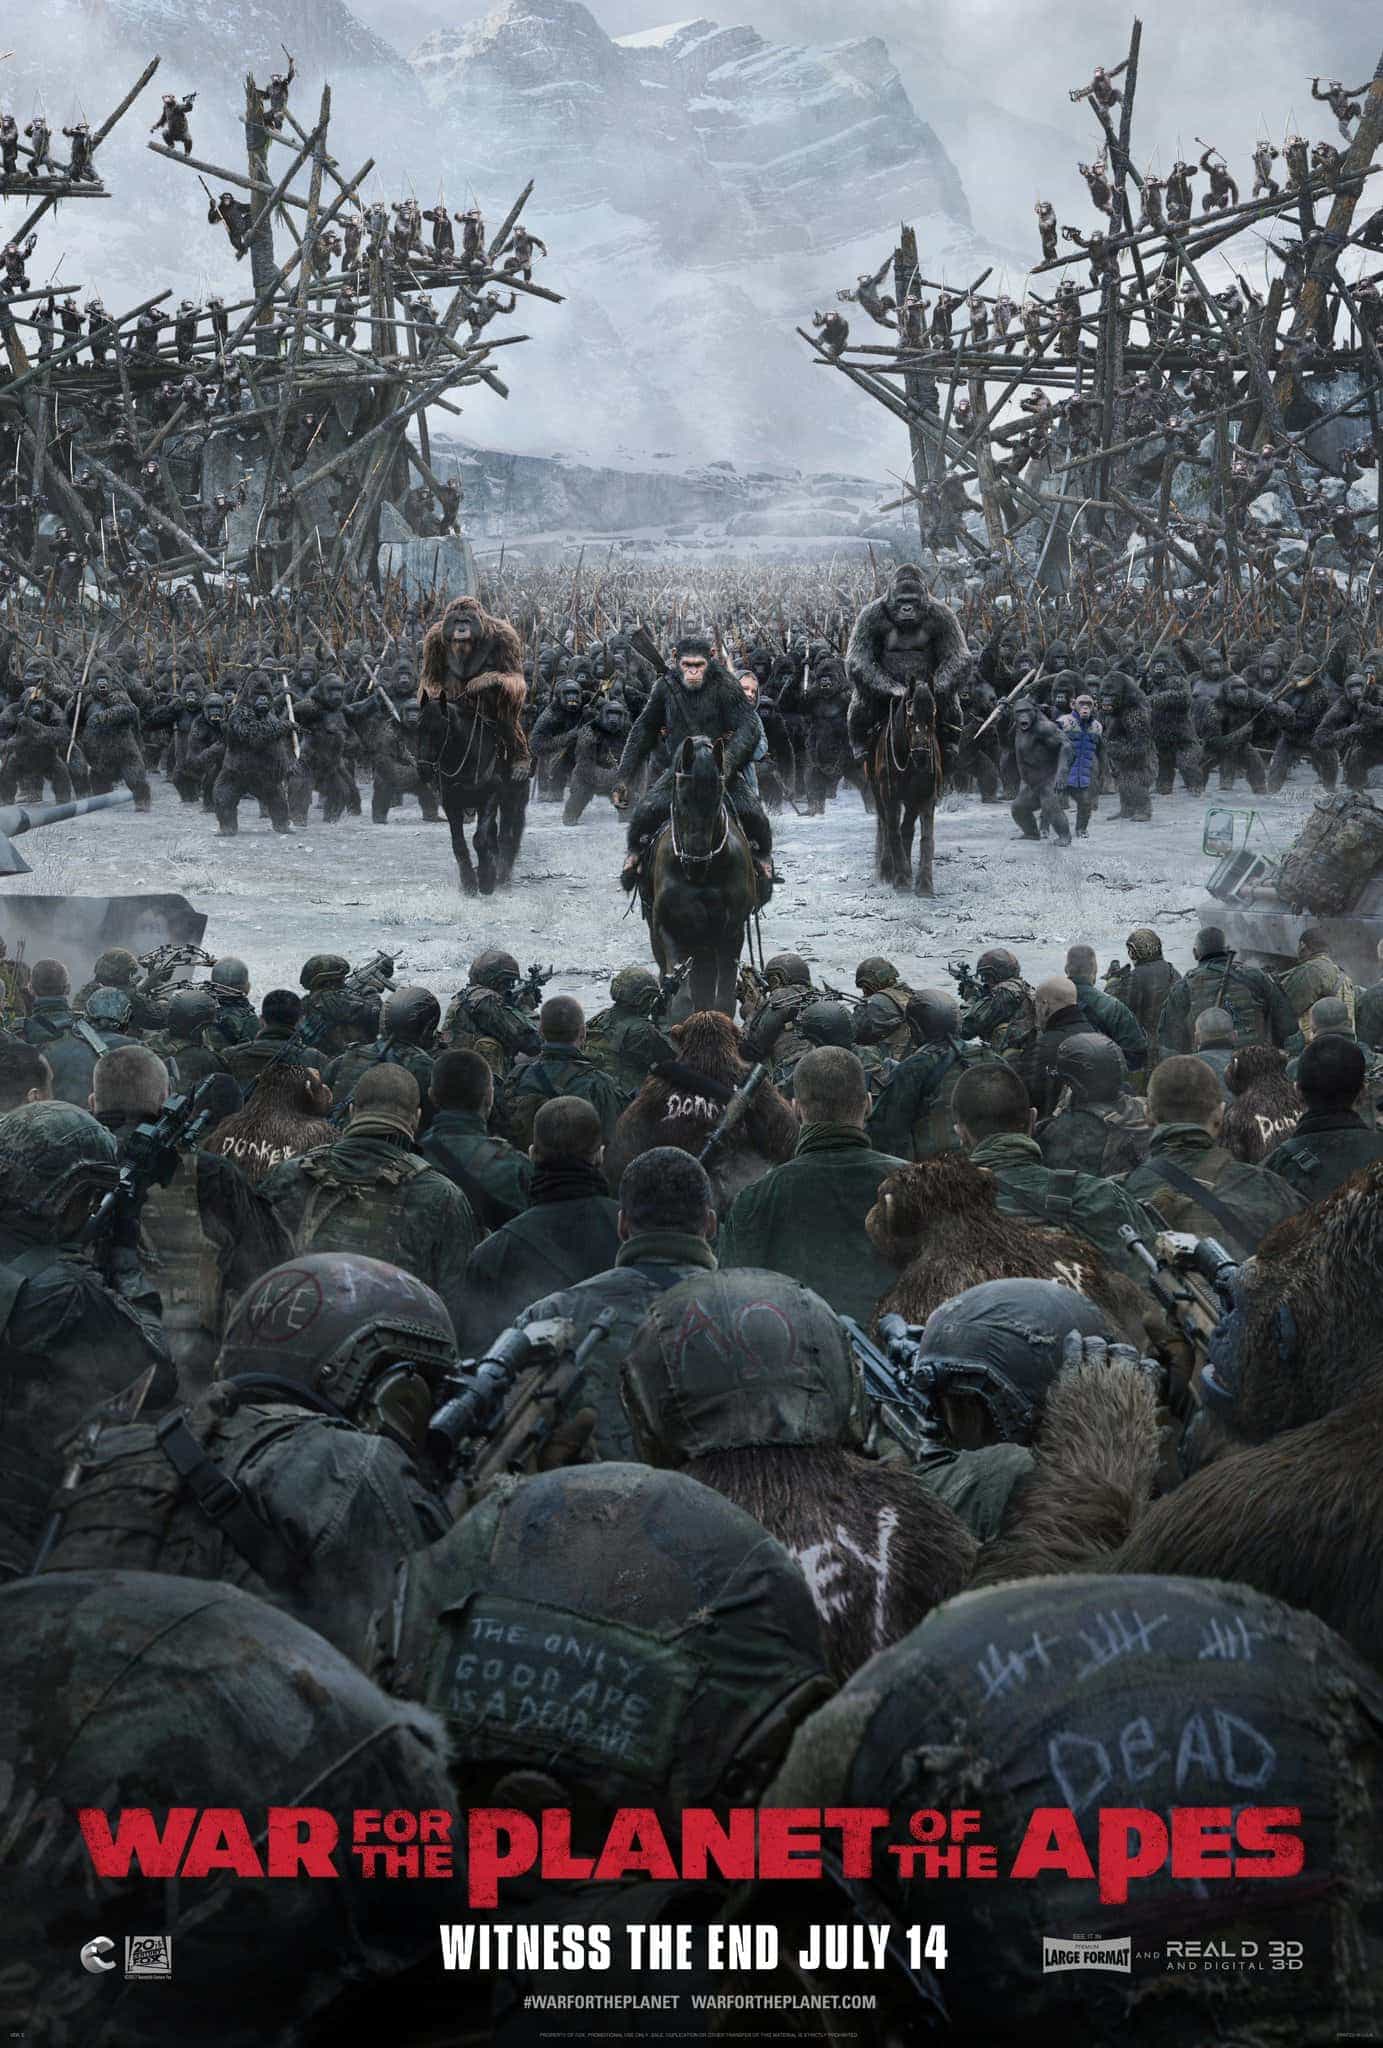 Final trailer for War For The Planet of The Apes - Caesars final showdown!